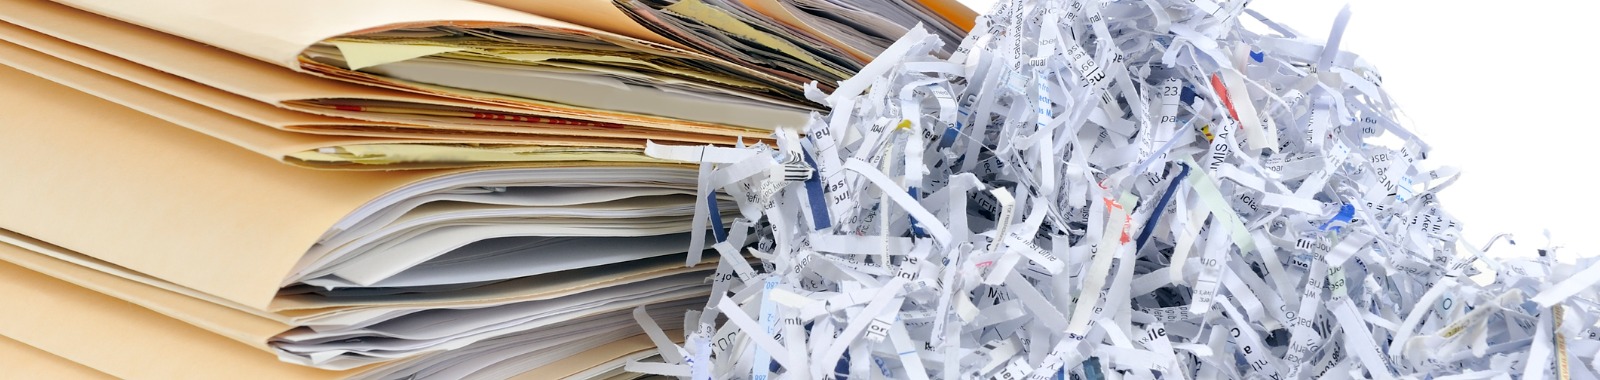 files and shredded papers